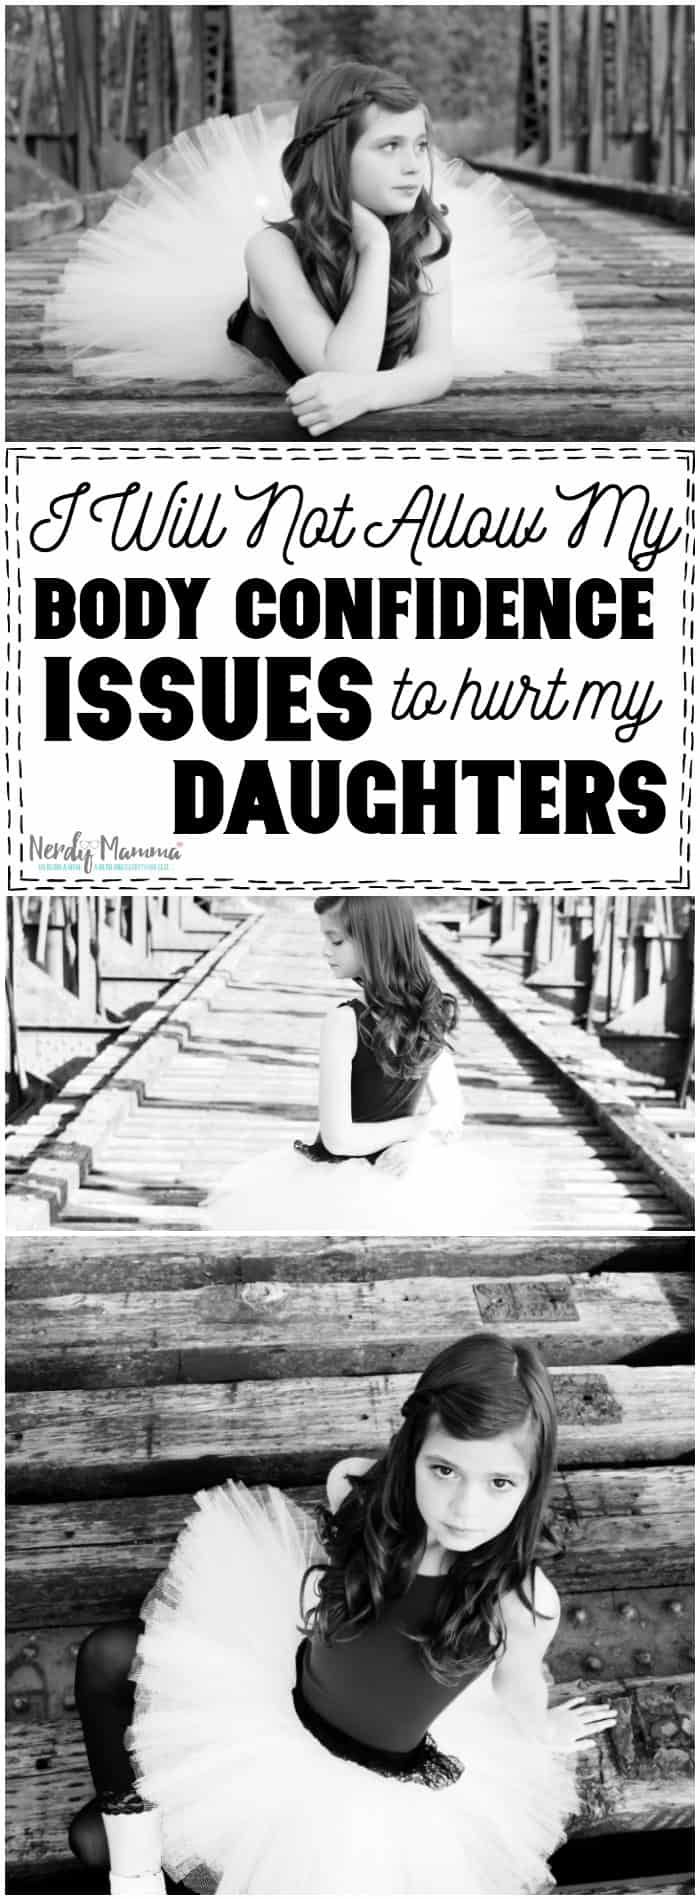 Oh, I love this mom's thought on not allowing her daughters to be hurt by her body confidence issues. So simple and yet, I bet she wins. LOL!